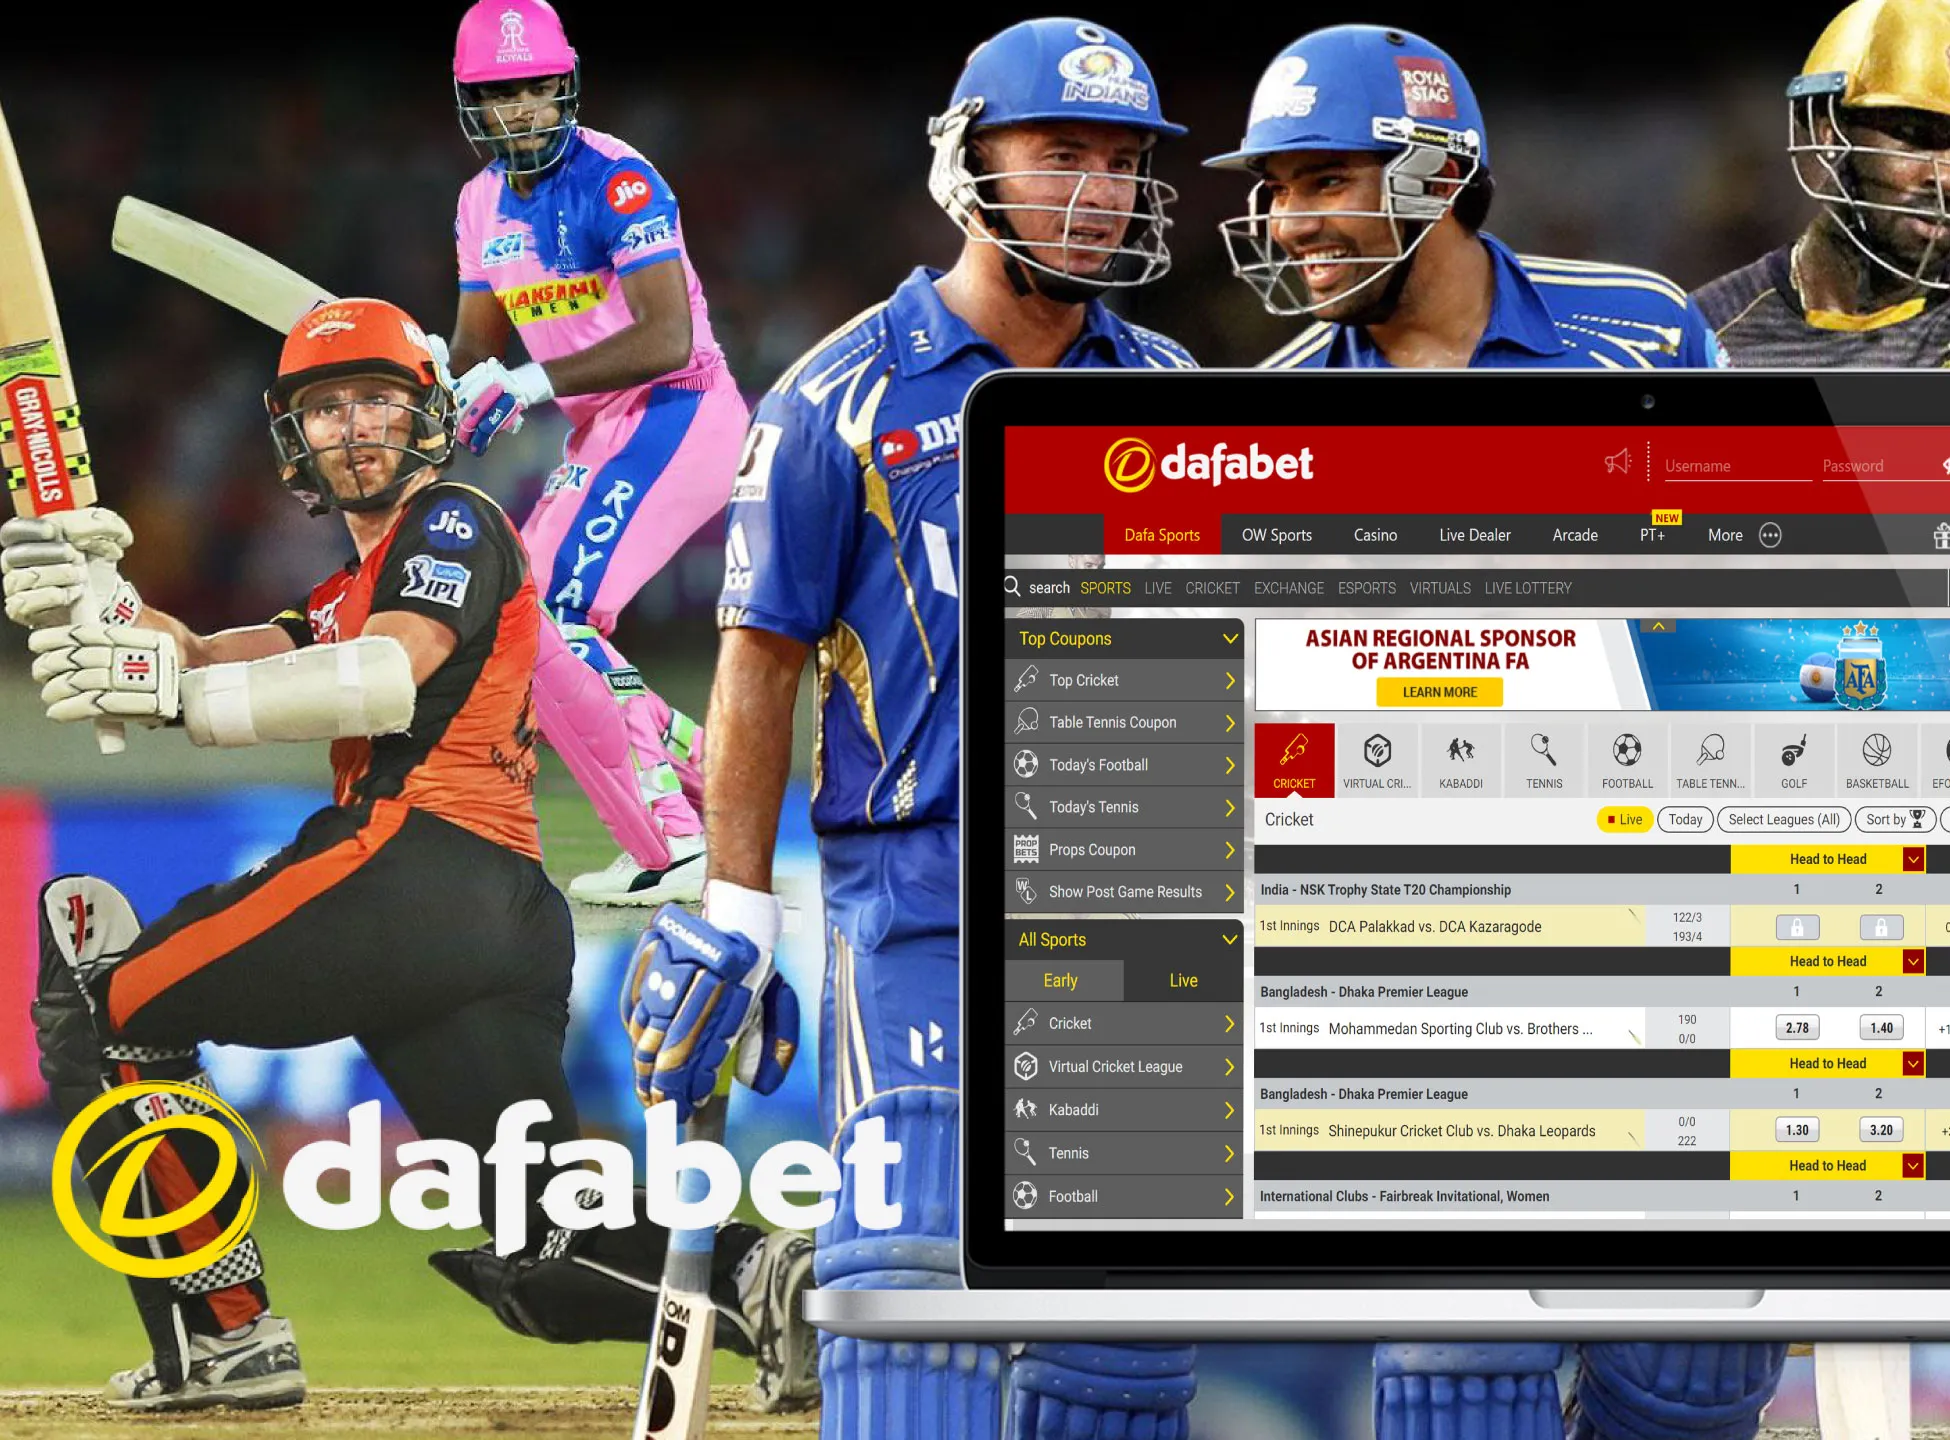 Go to the Dafabet site, sign up, tip up your account and start betting on cricket.